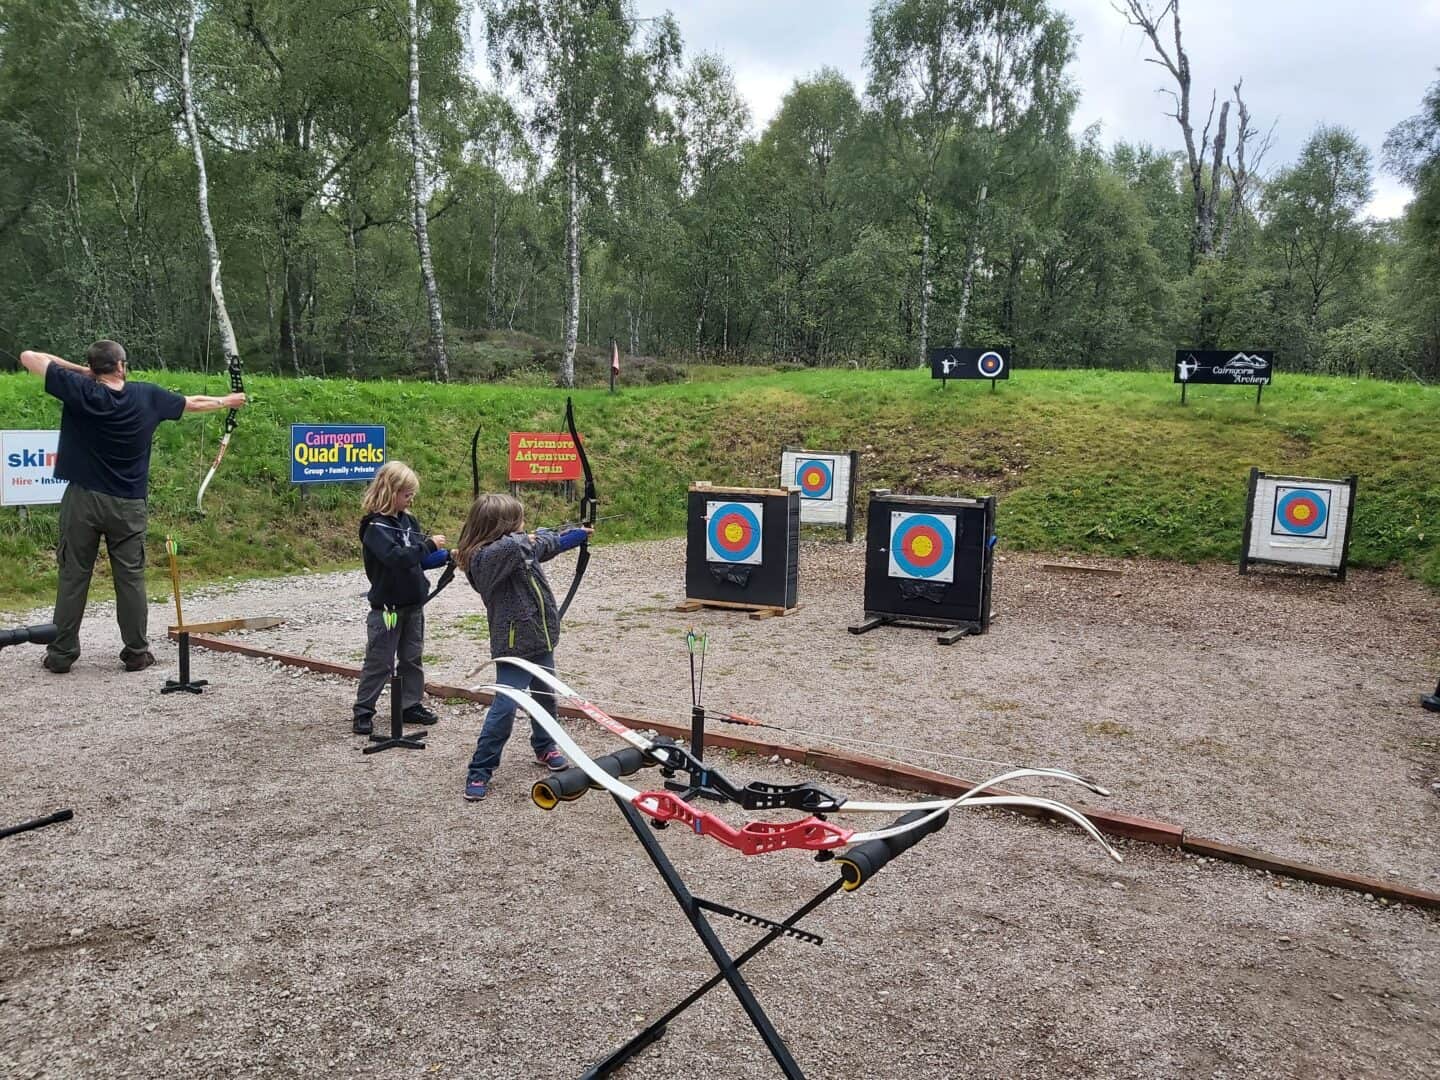 Two girls and a man doing archery at Dalraddy Holiday Park. Aiming their bows at targets with grassy bank and trees in background.  